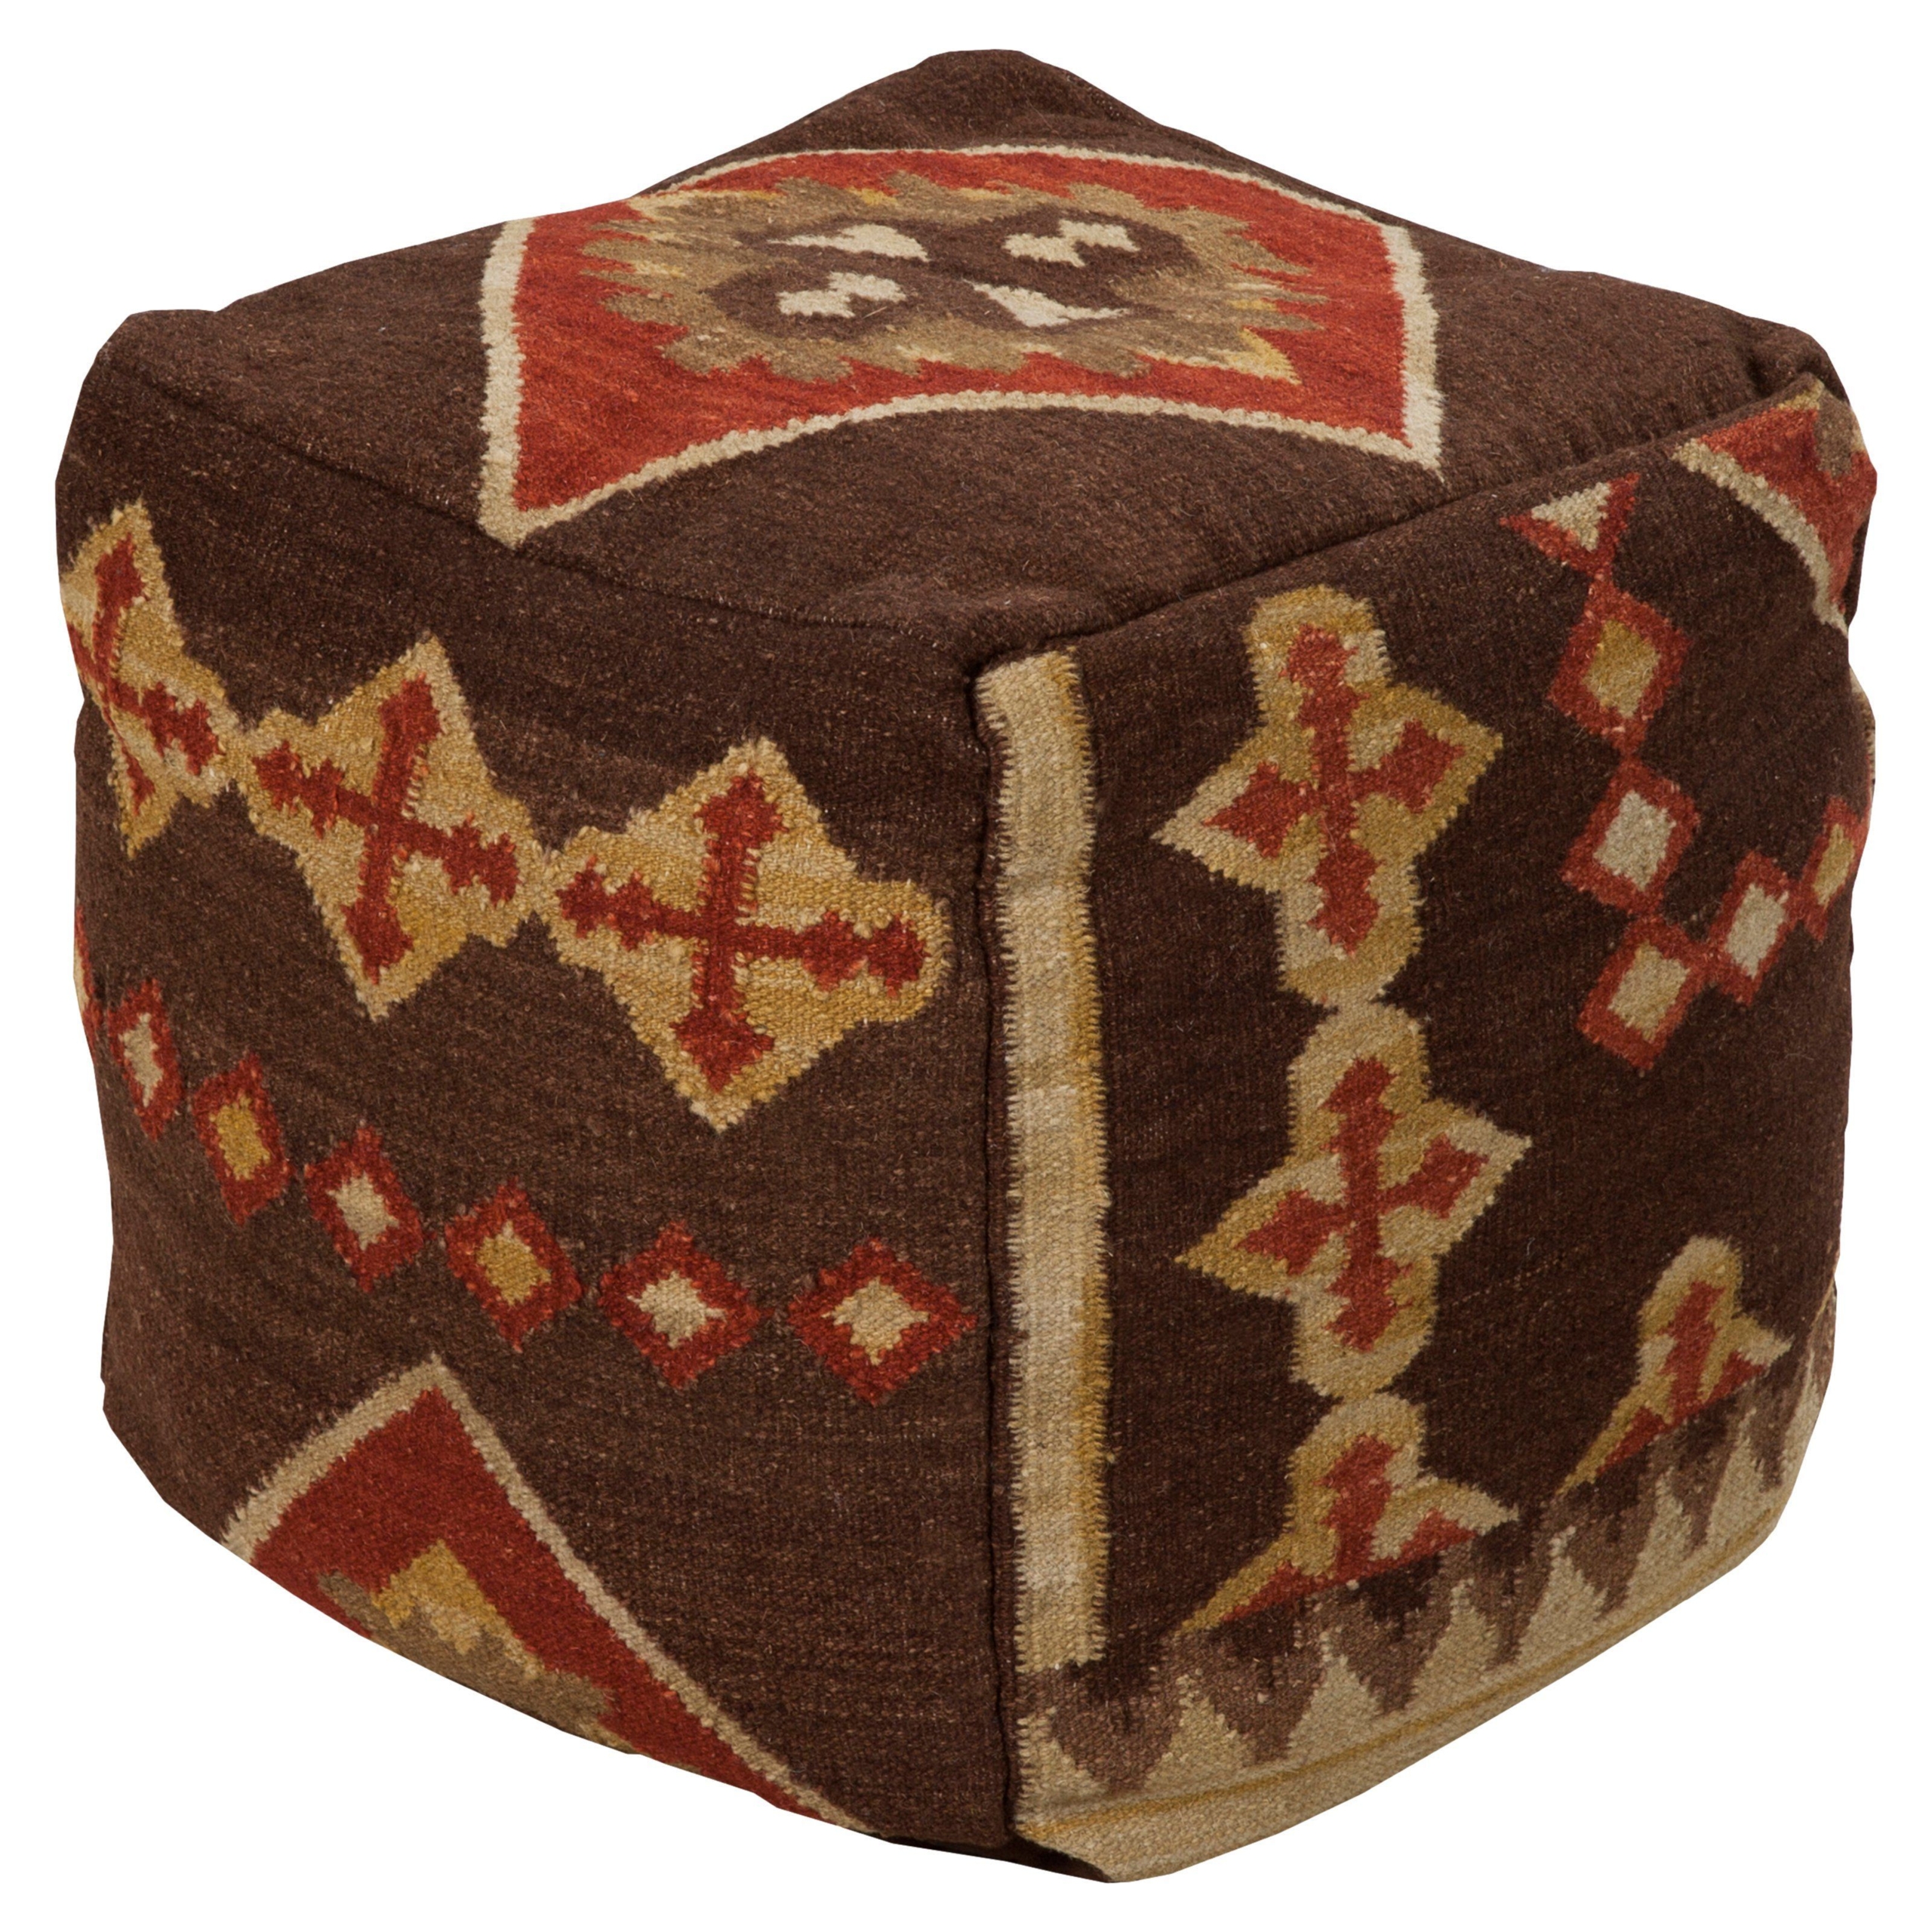 18" Chocolate Brown and Cinnamon Red Southwestern Wool Square Pouf Ottoman